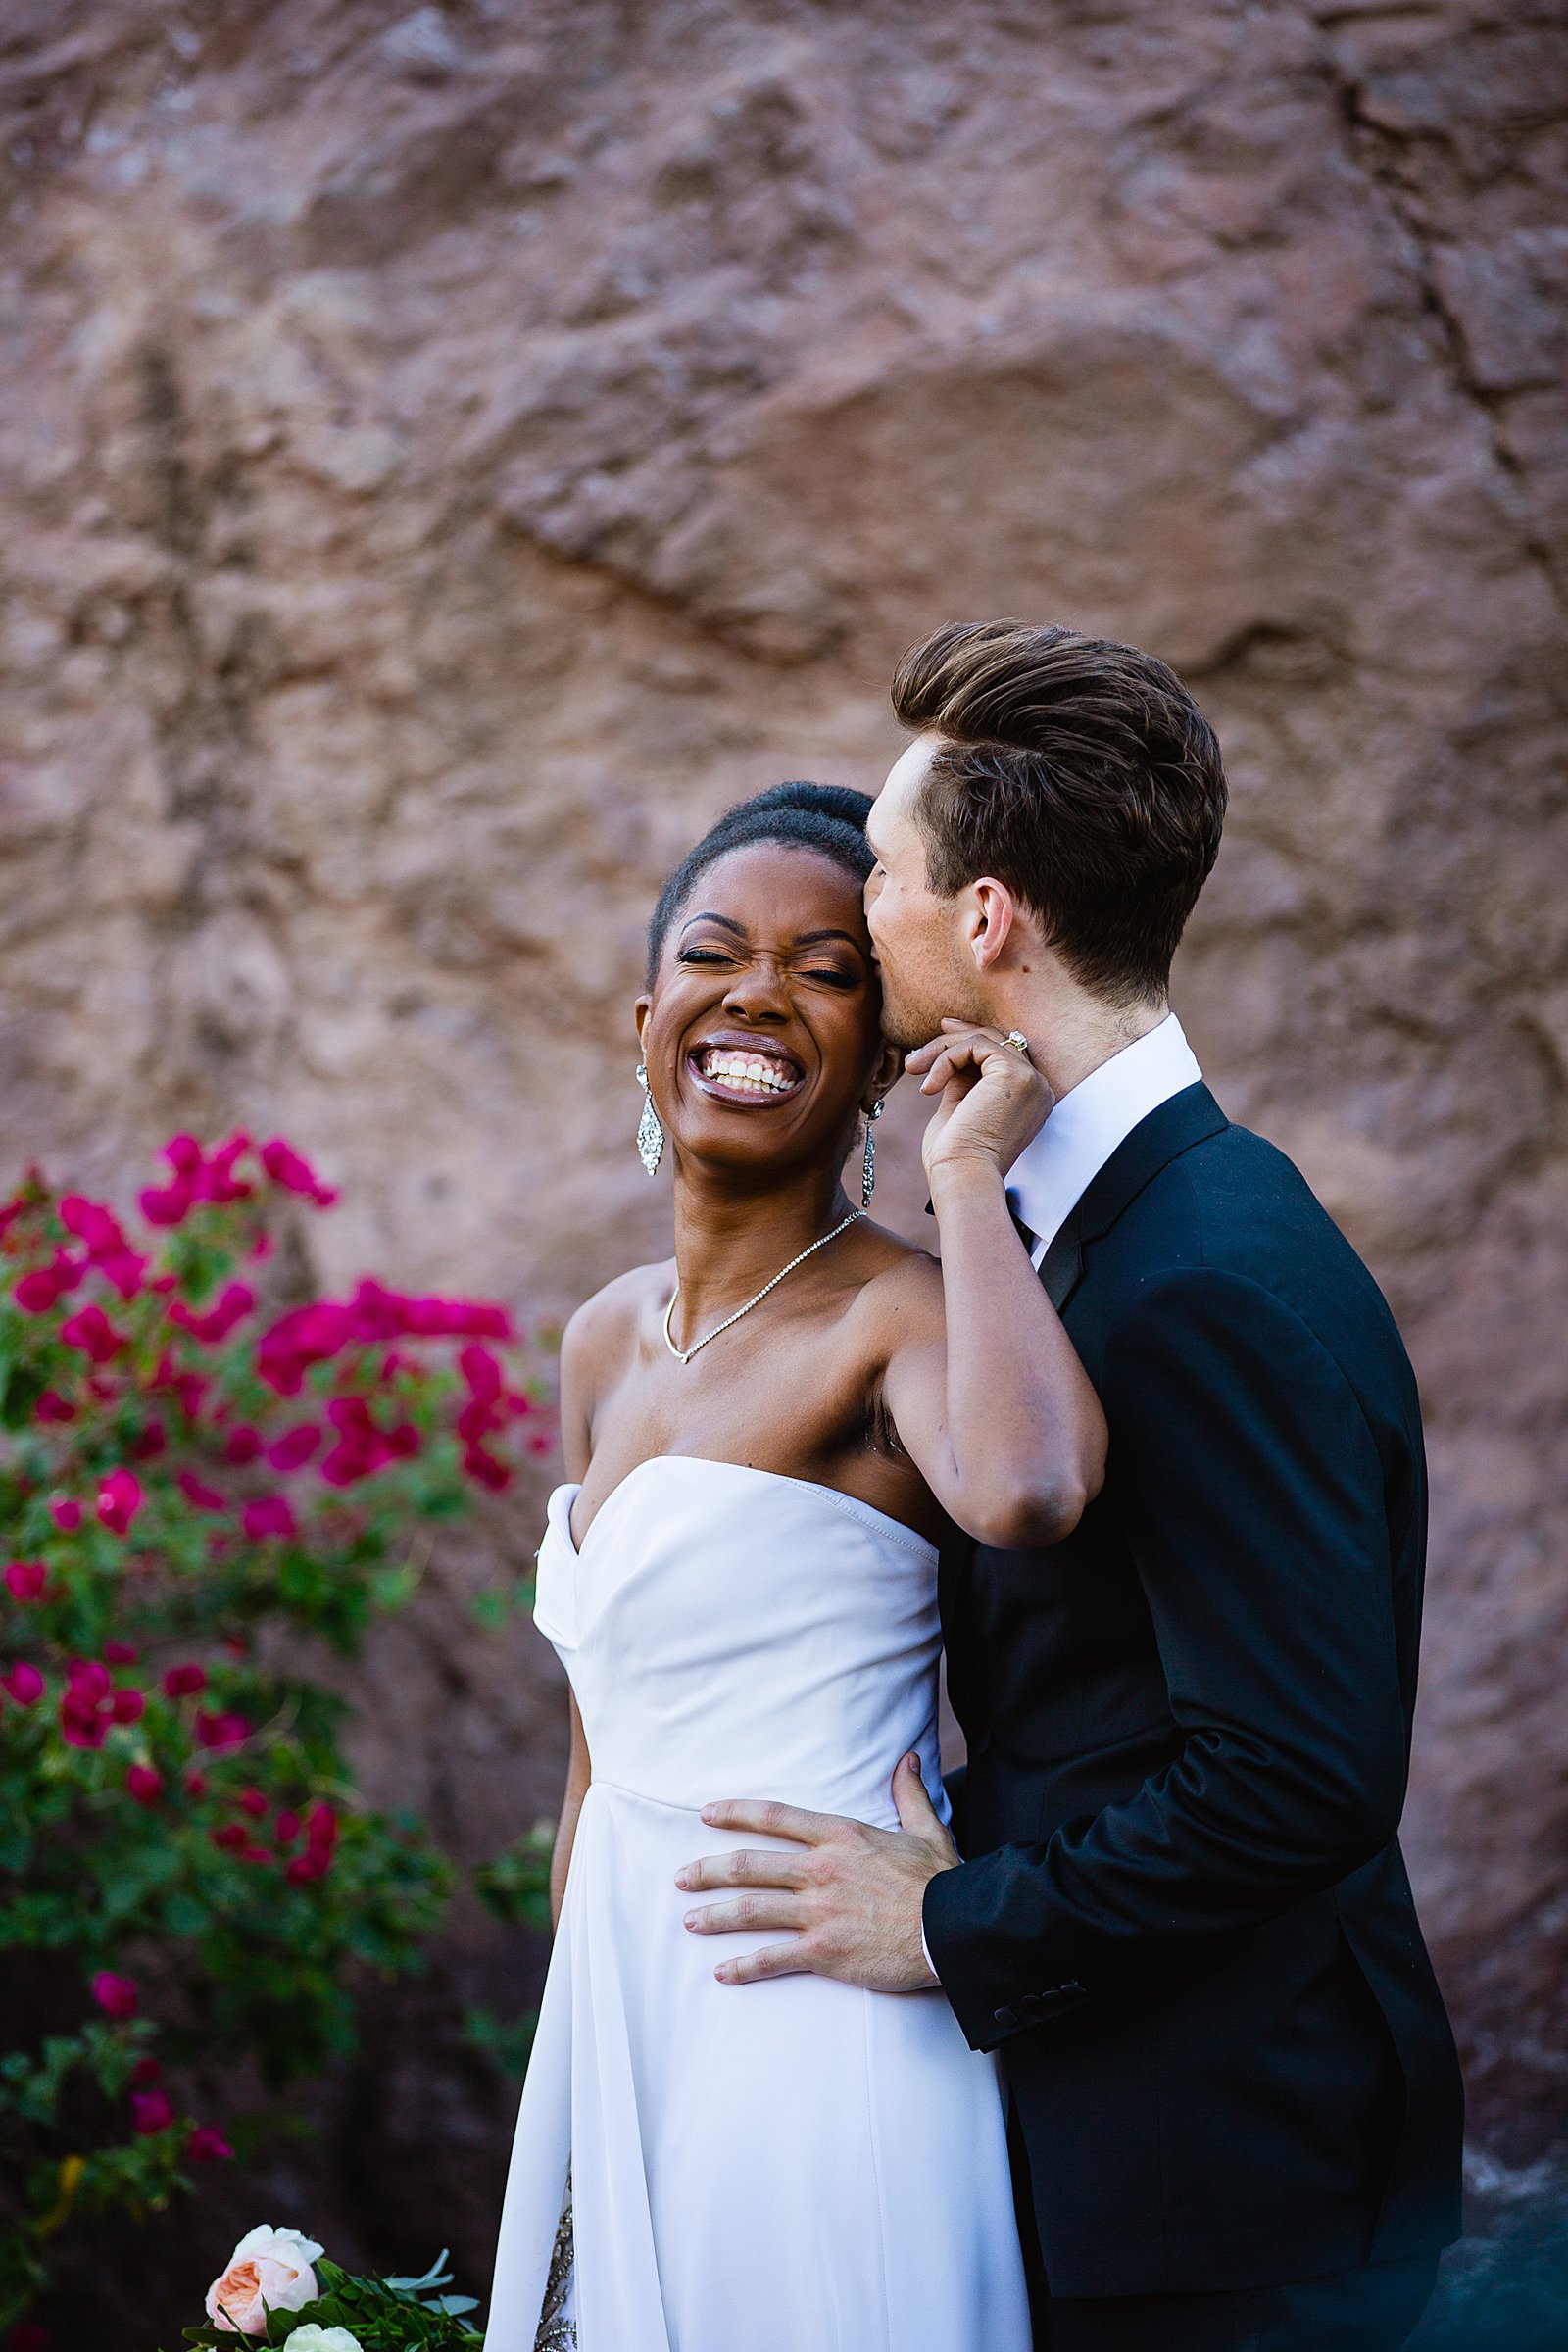 Bride and Groom laughing together during their multicultural wedding by Arizona wedding photographer PMA Photography.